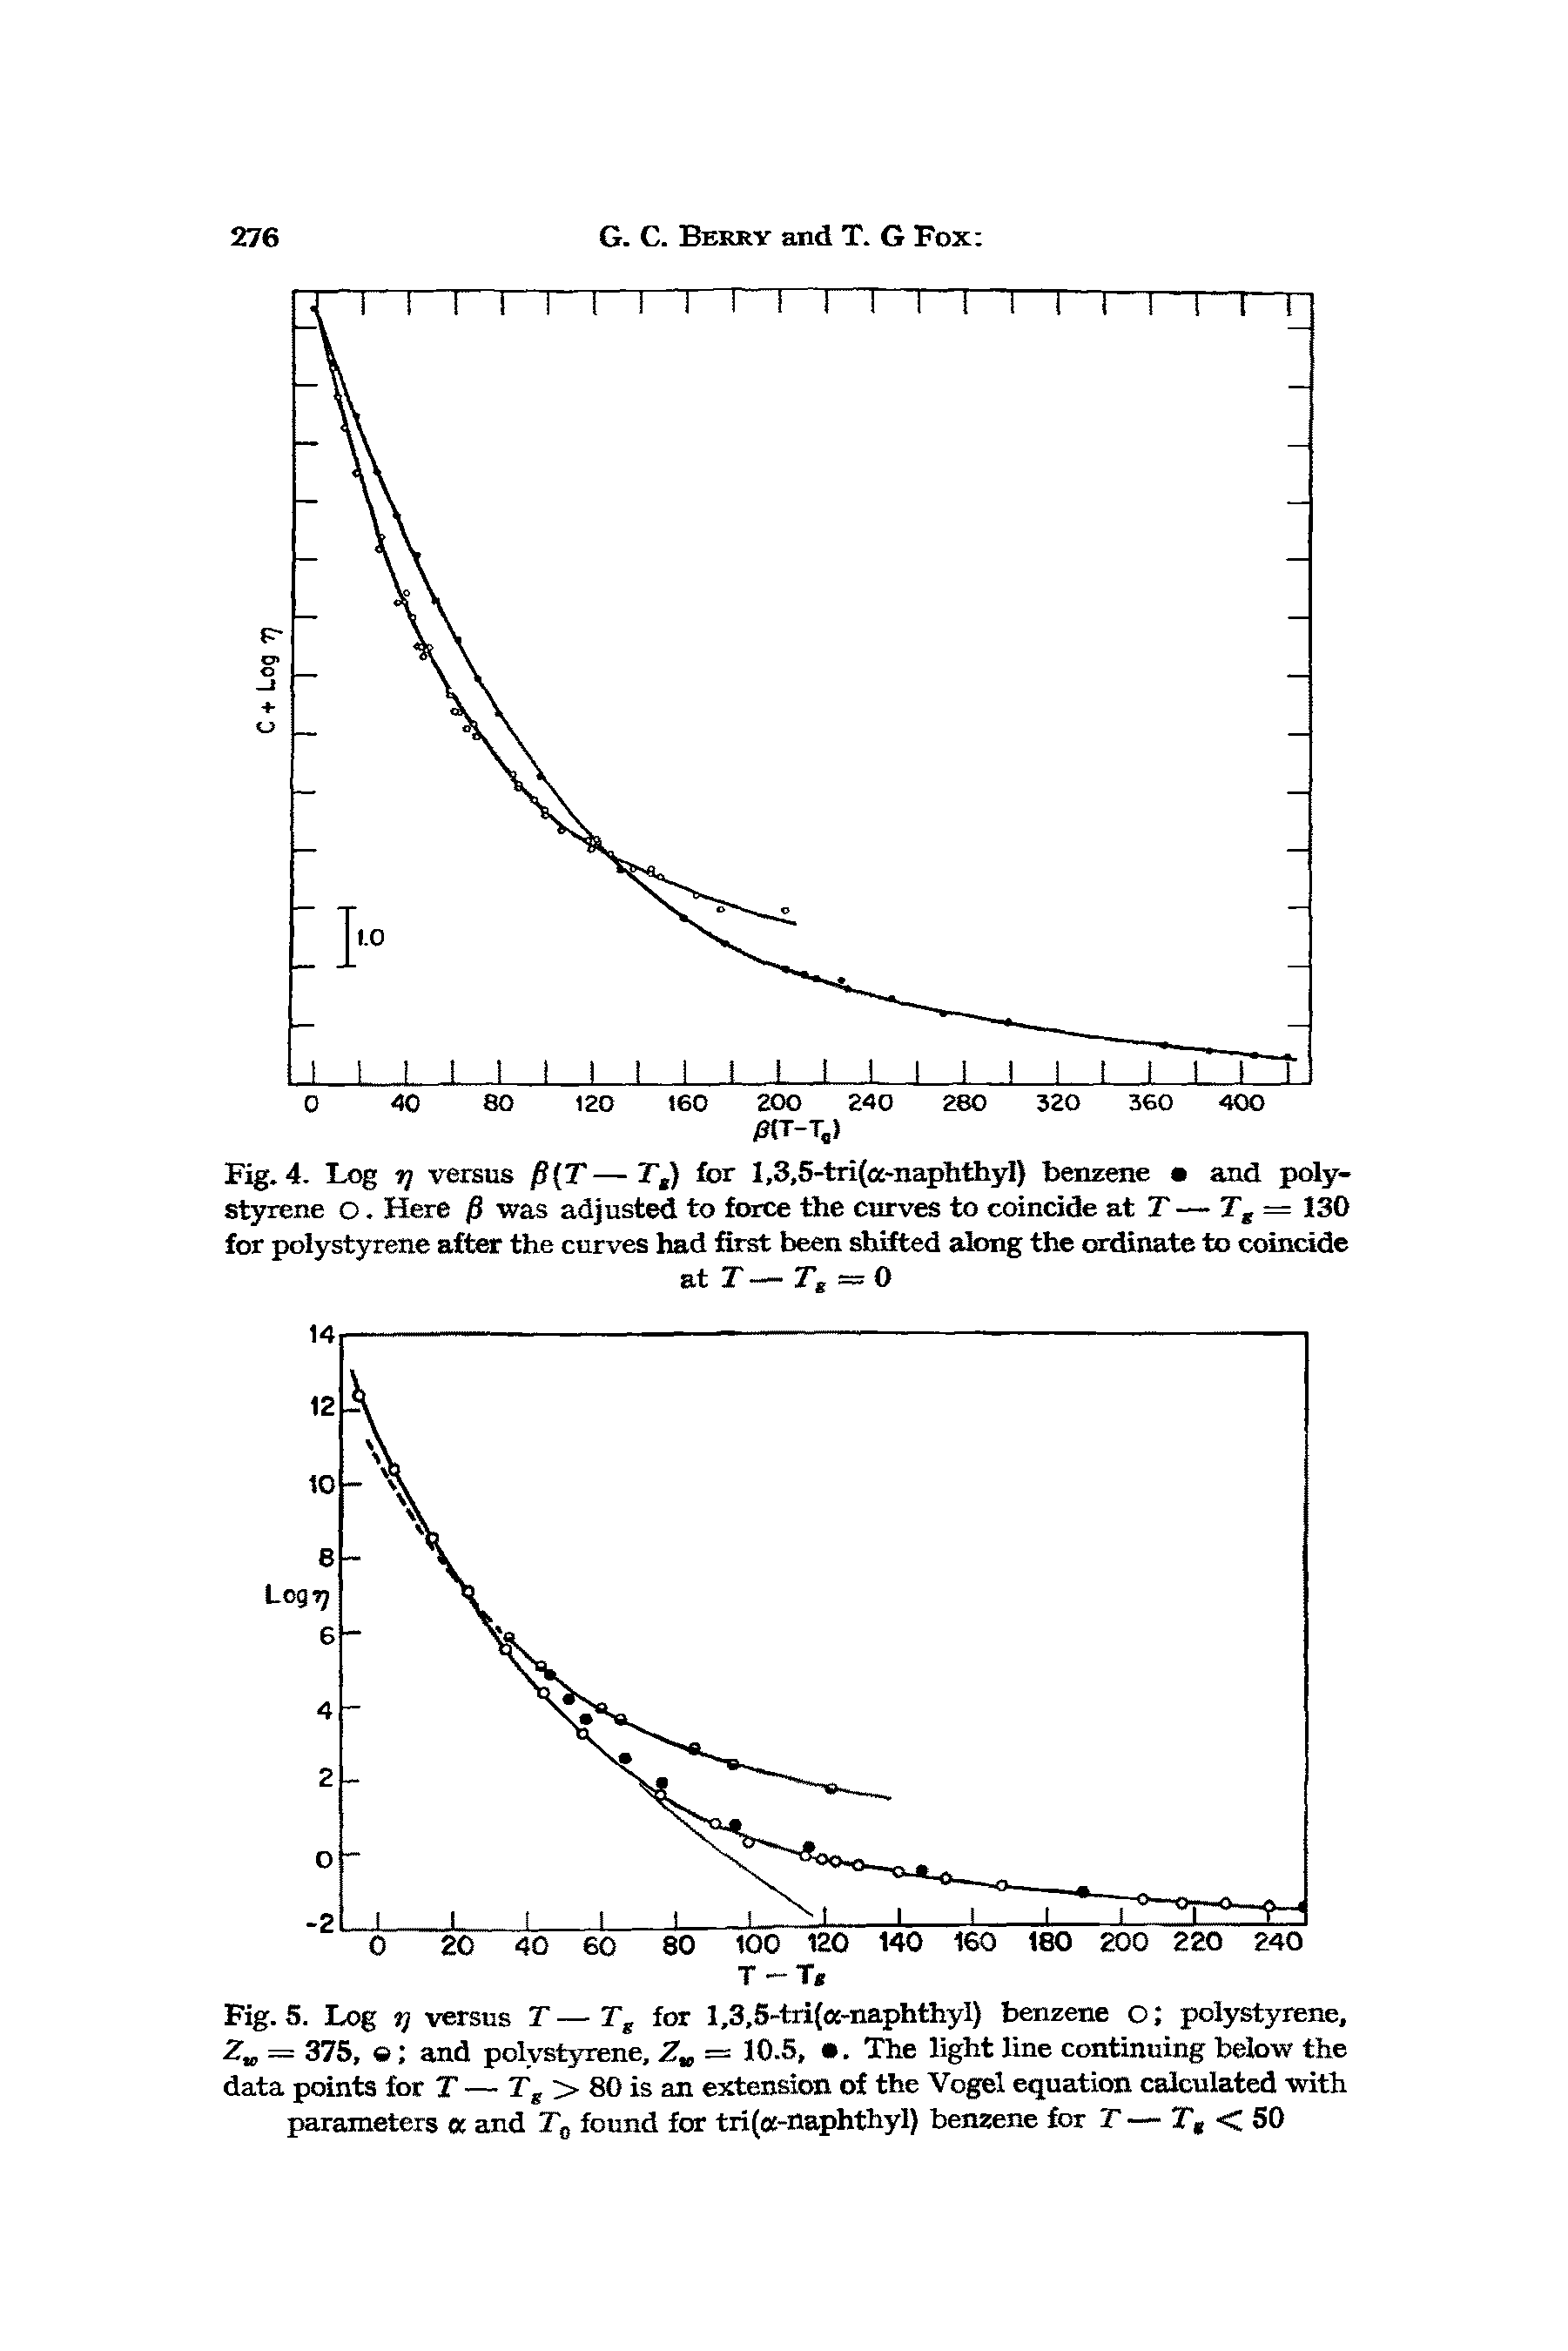 Fig. 5. Log r] versus F — Fg for l,3,5-tri( -naphthyl) benzene o polystyrene, Z = 375, and polystyrene, = 10.5, . The light line continuing below the data points for F — Fg > 80 is an extension of the Vogel equation calculated with parameters and F found for tri(ot-naphthyl) benzene for F— Fg < 50...